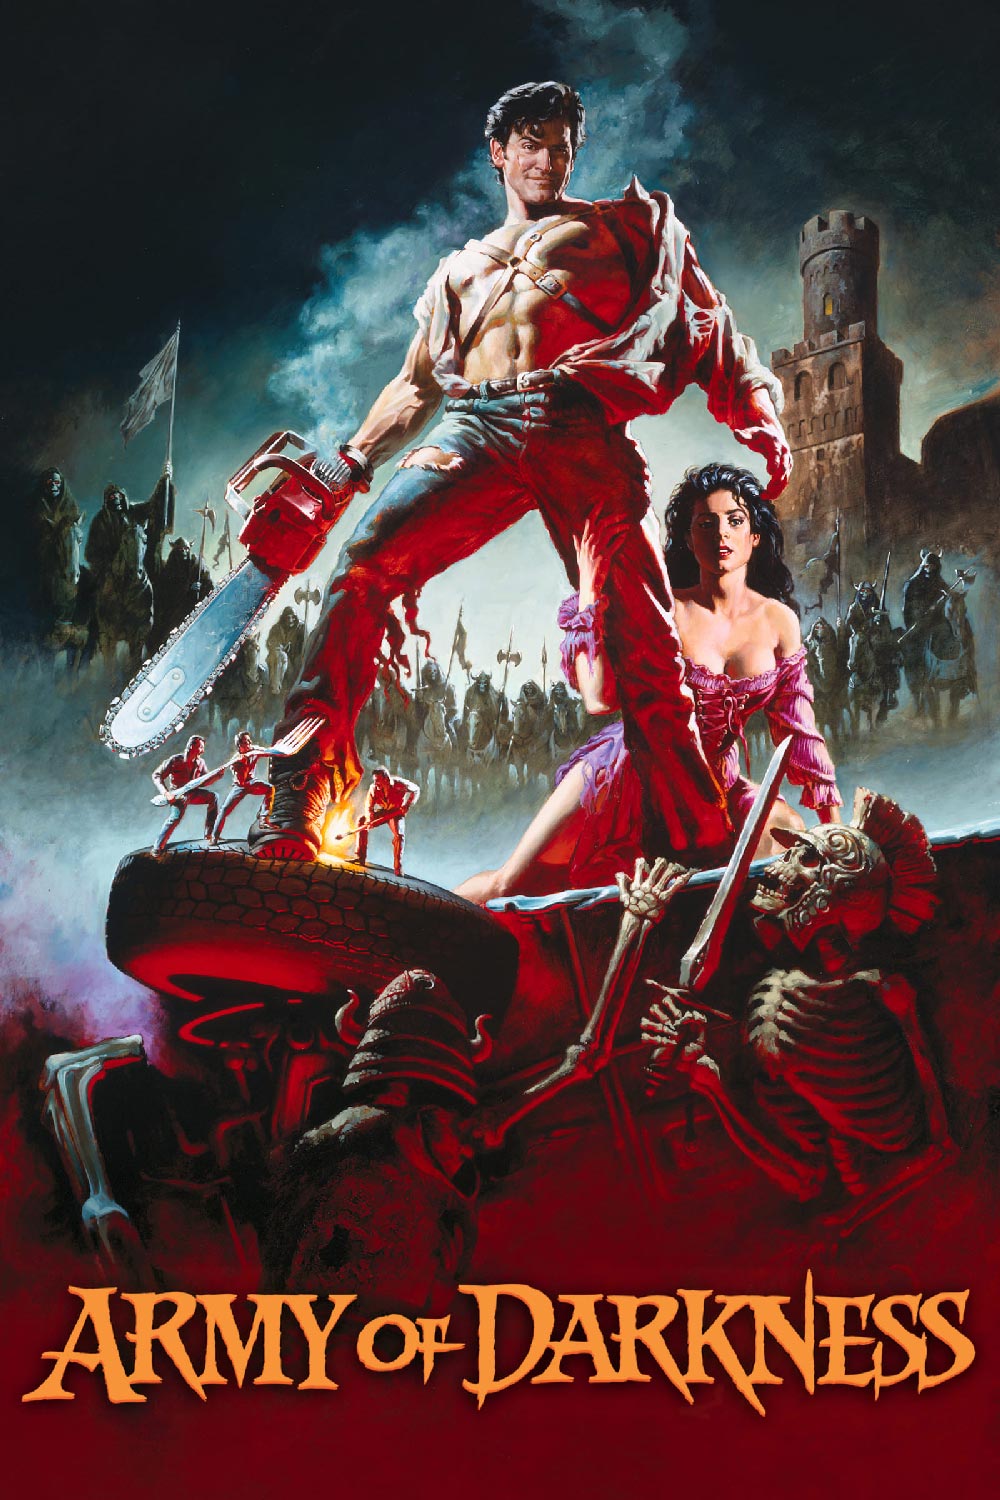 Army of Darkness (1992) Poster